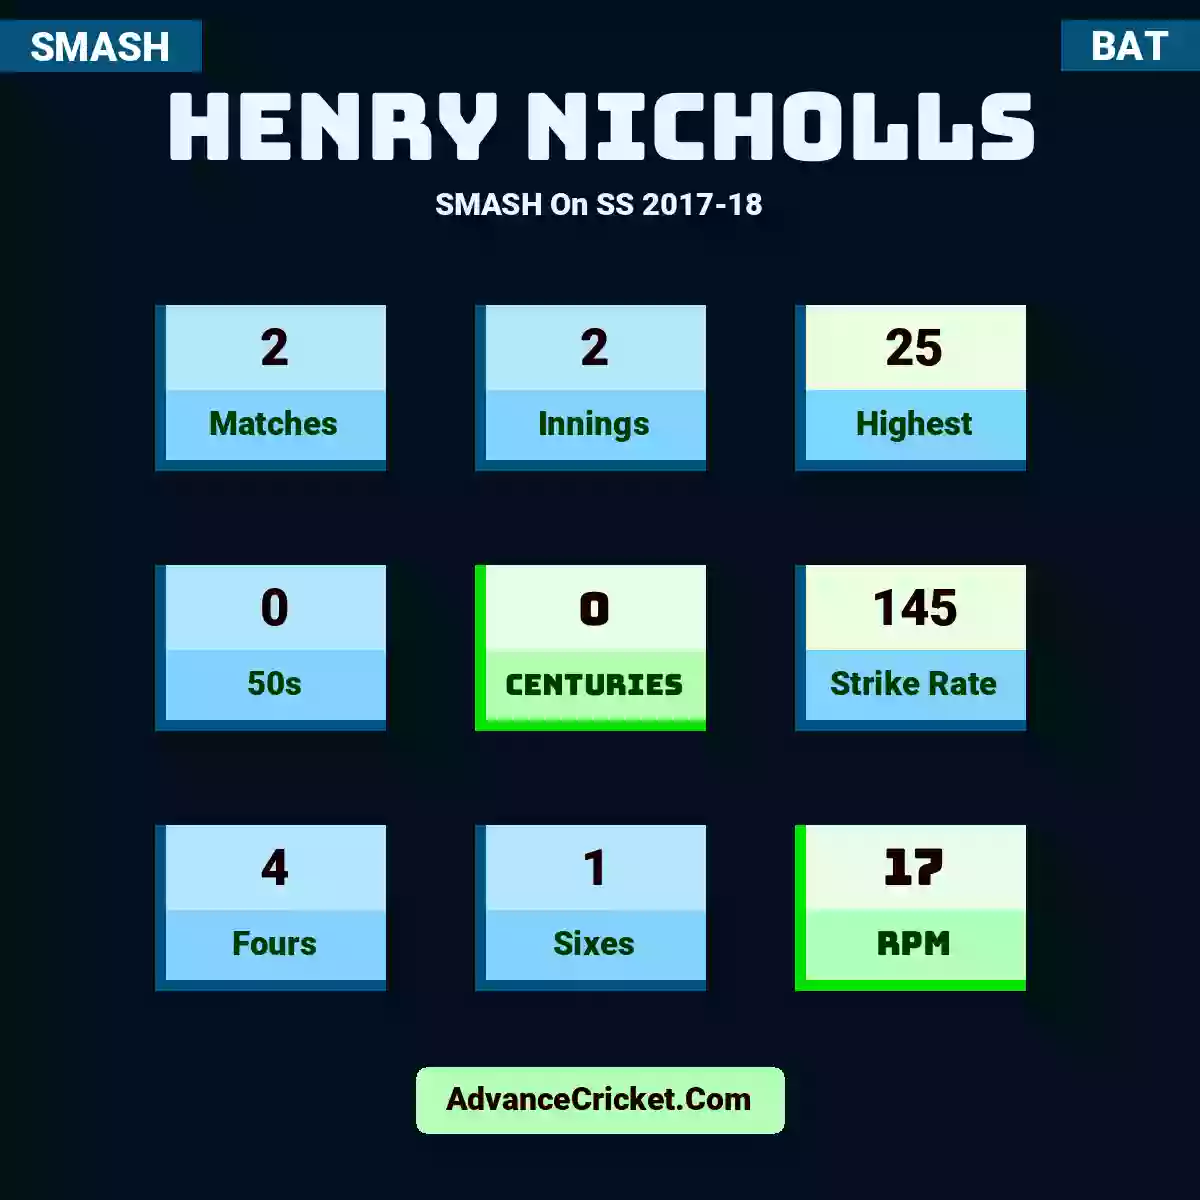 Henry Nicholls SMASH  On SS 2017-18, Henry Nicholls played 2 matches, scored 25 runs as highest, 0 half-centuries, and 0 centuries, with a strike rate of 145. H.Nicholls hit 4 fours and 1 sixes, with an RPM of 17.